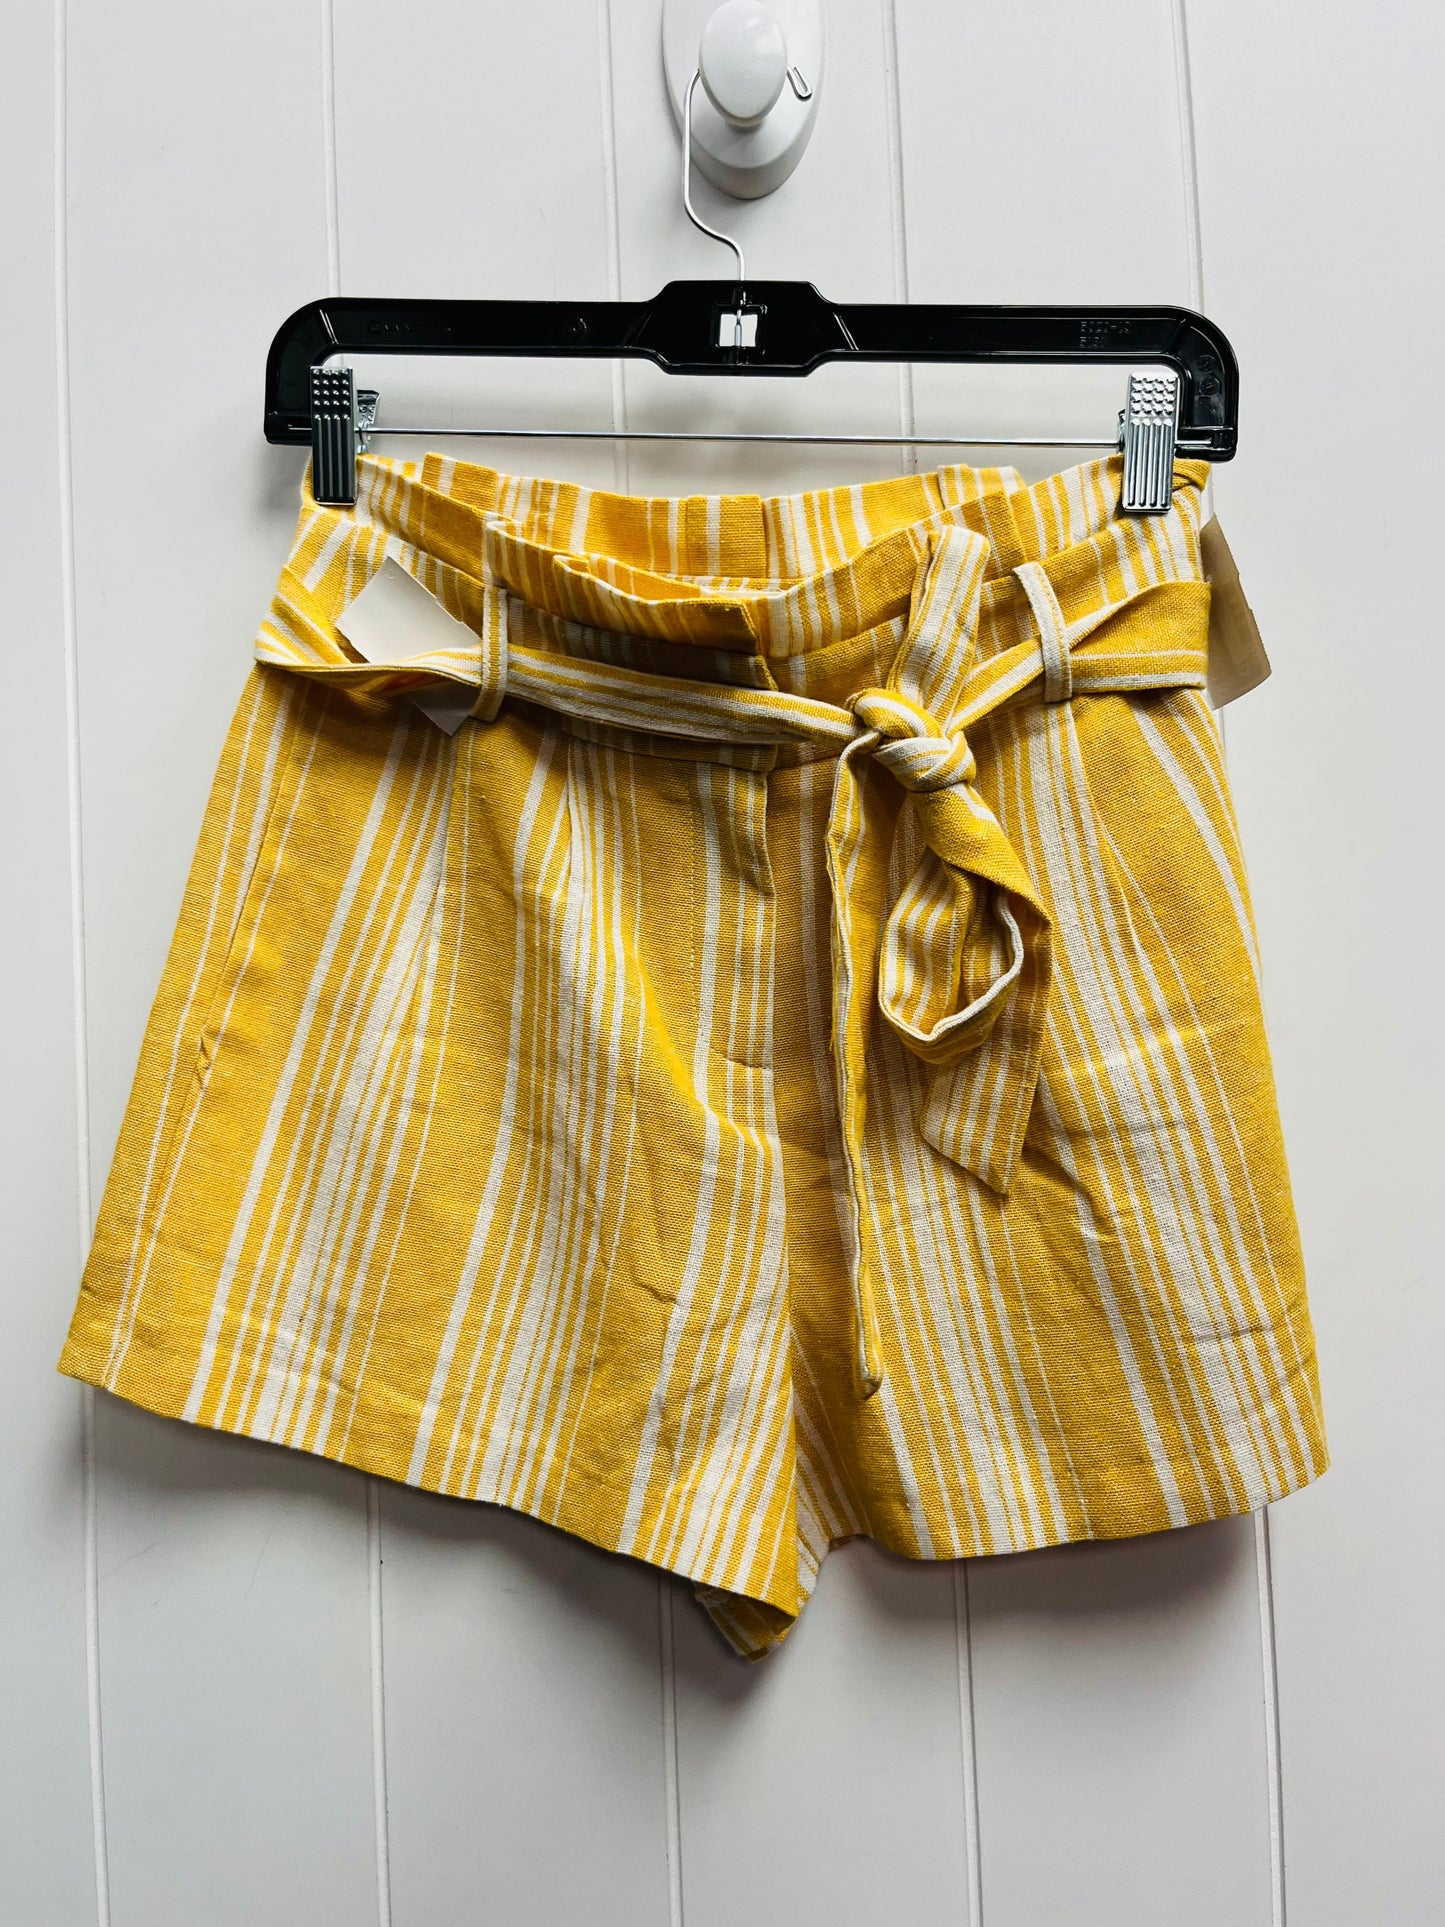 Yellow Shorts Clothes Mentor, Size S